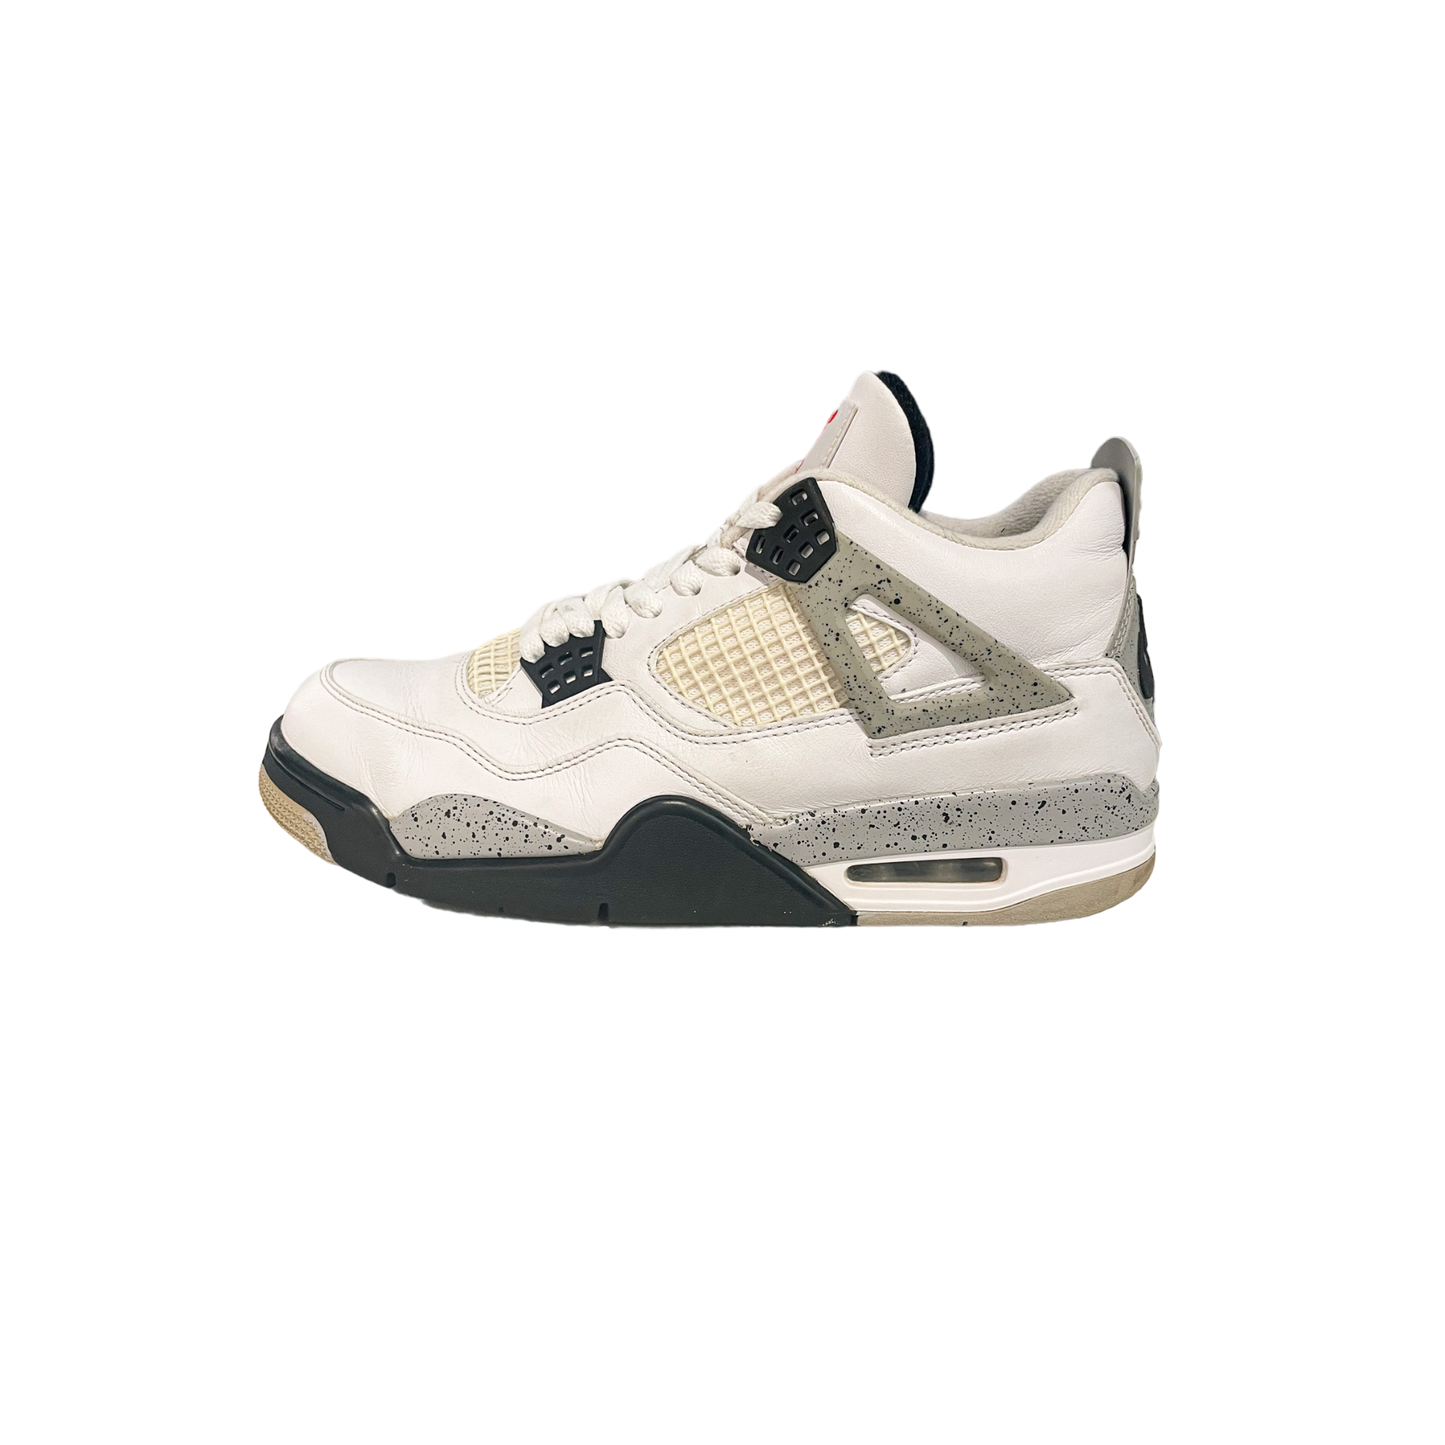 Air Jordan 4 Retro White Cement 2016 (Used/Refreshed, Replacement Box branded)